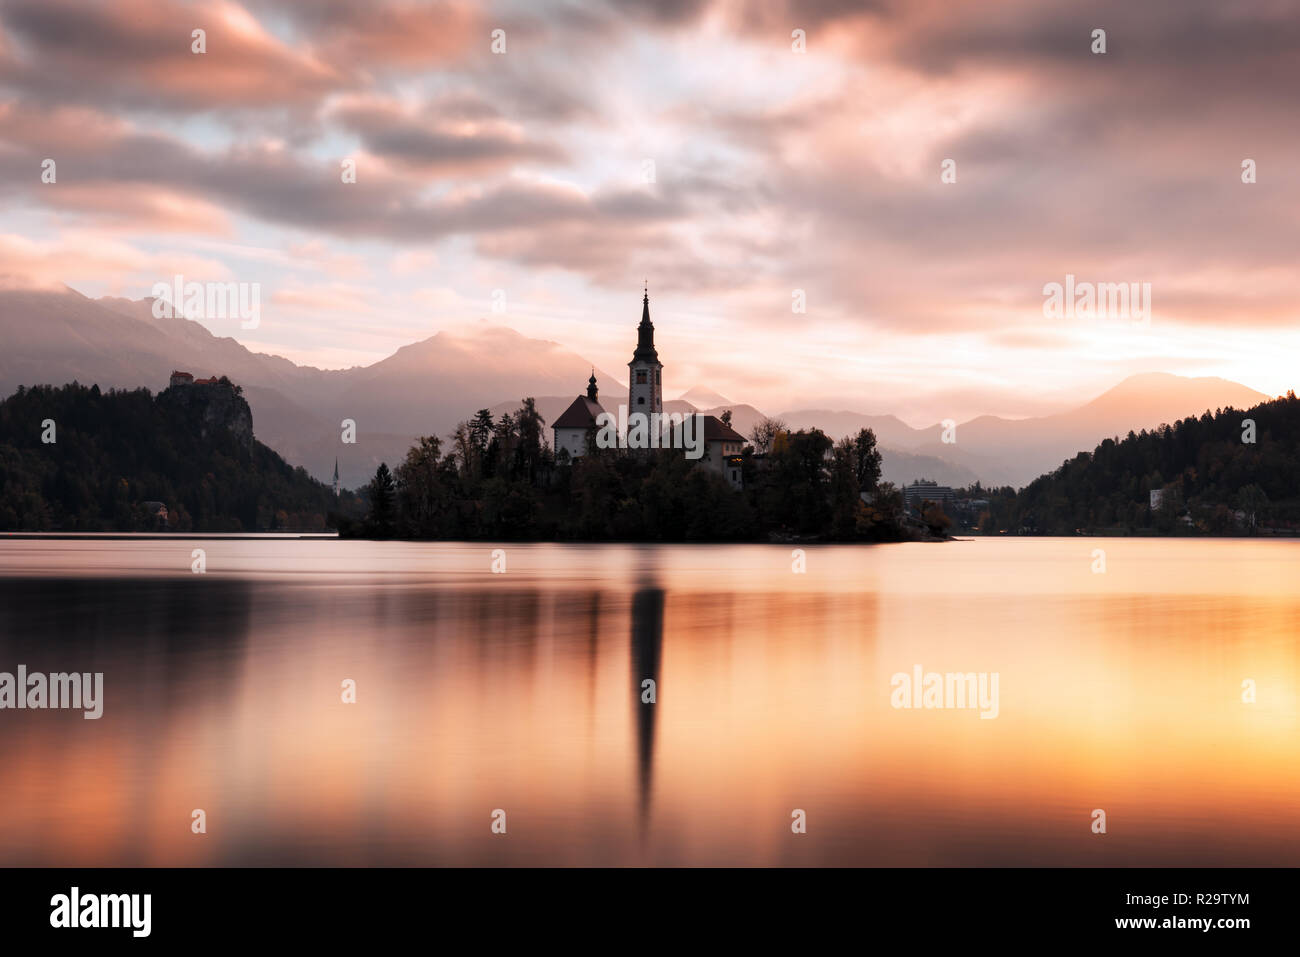 Colorful sunrise view of Bled lake in Julian Alps, Slovenia. Pilgrimage church of the Assumption of Maria on a foreground. Landscape photography Stock Photo